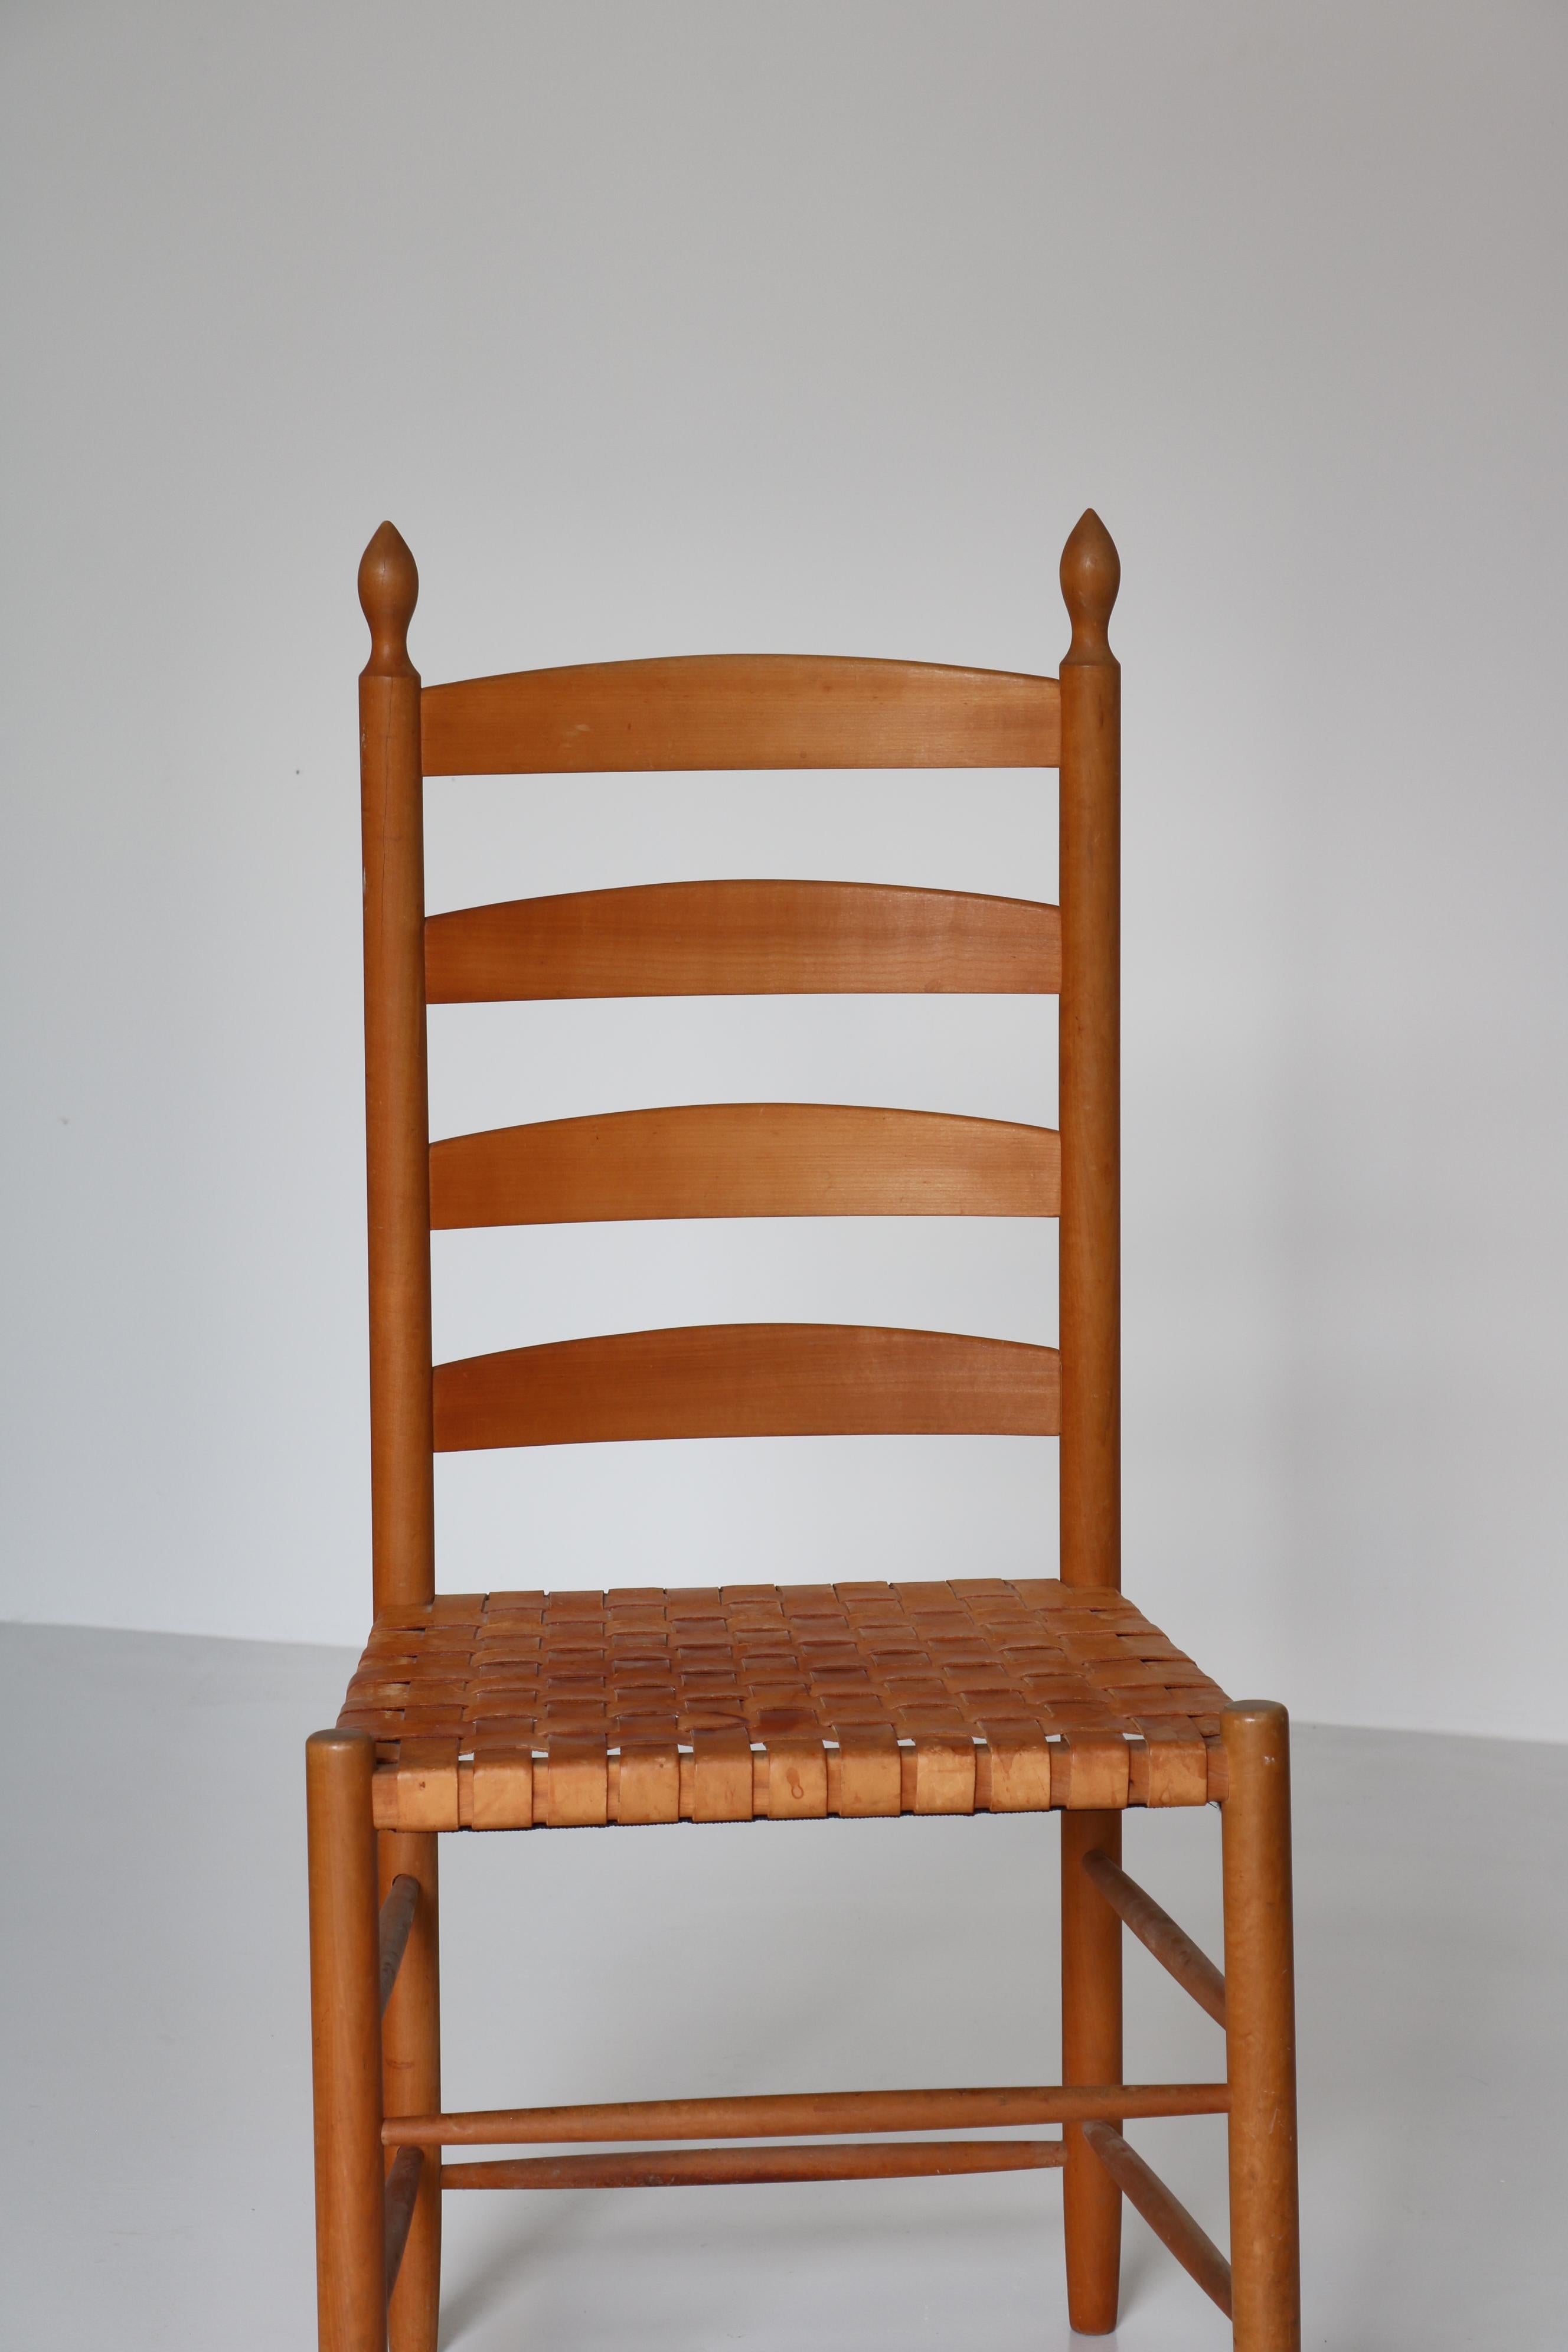 Vintage Shaker-style ladder back chair by Danish cabinetmaker in the 1960s. The chairs is made from cherrywood and the seat woven saddle leather straps with a beautiful patina. The shaker American Shaker movement has an important place in the story